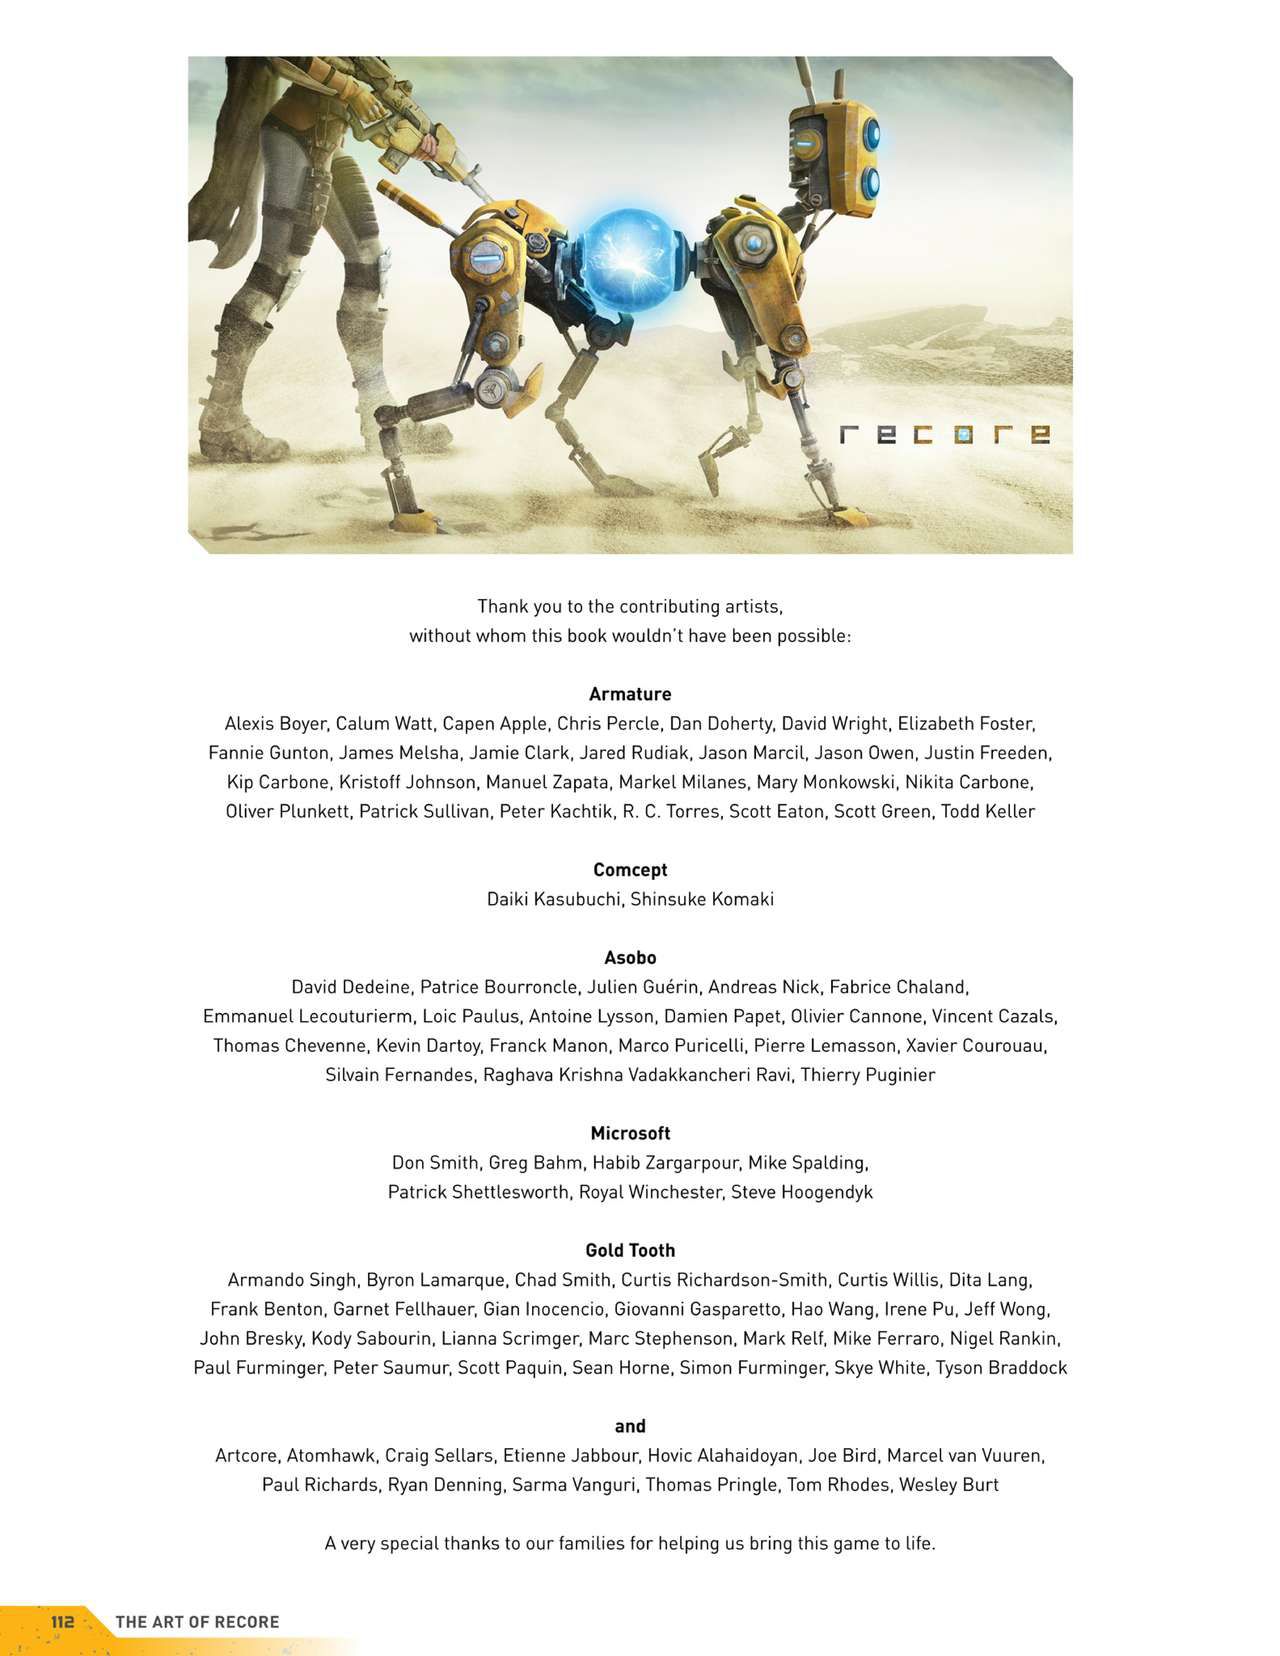 [Various] The Art of Recore 108